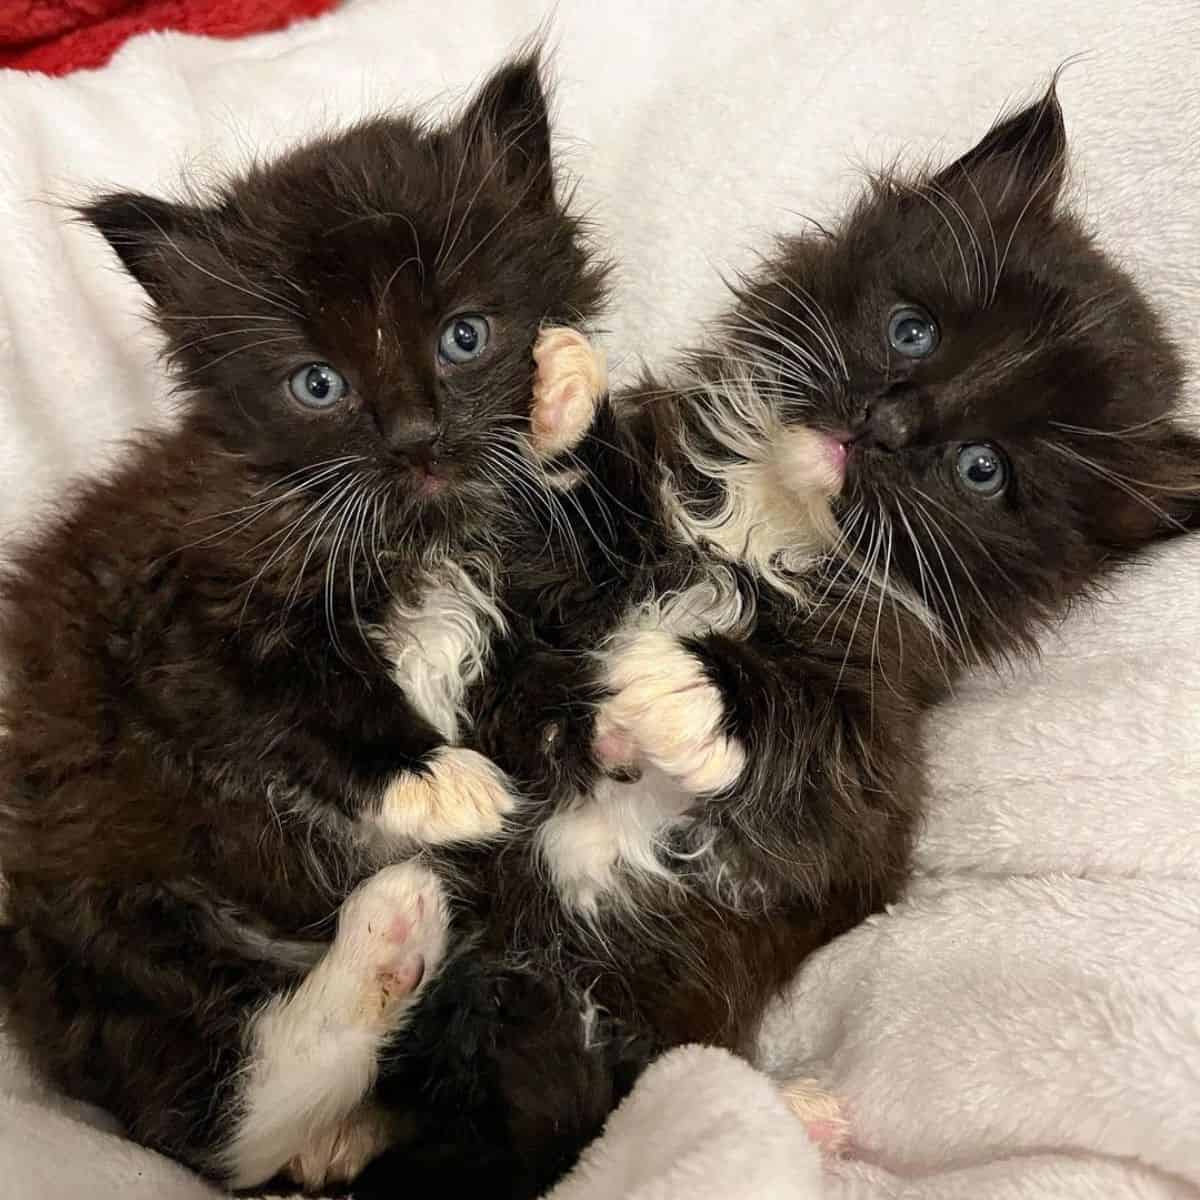 two black kittens lie next to each other